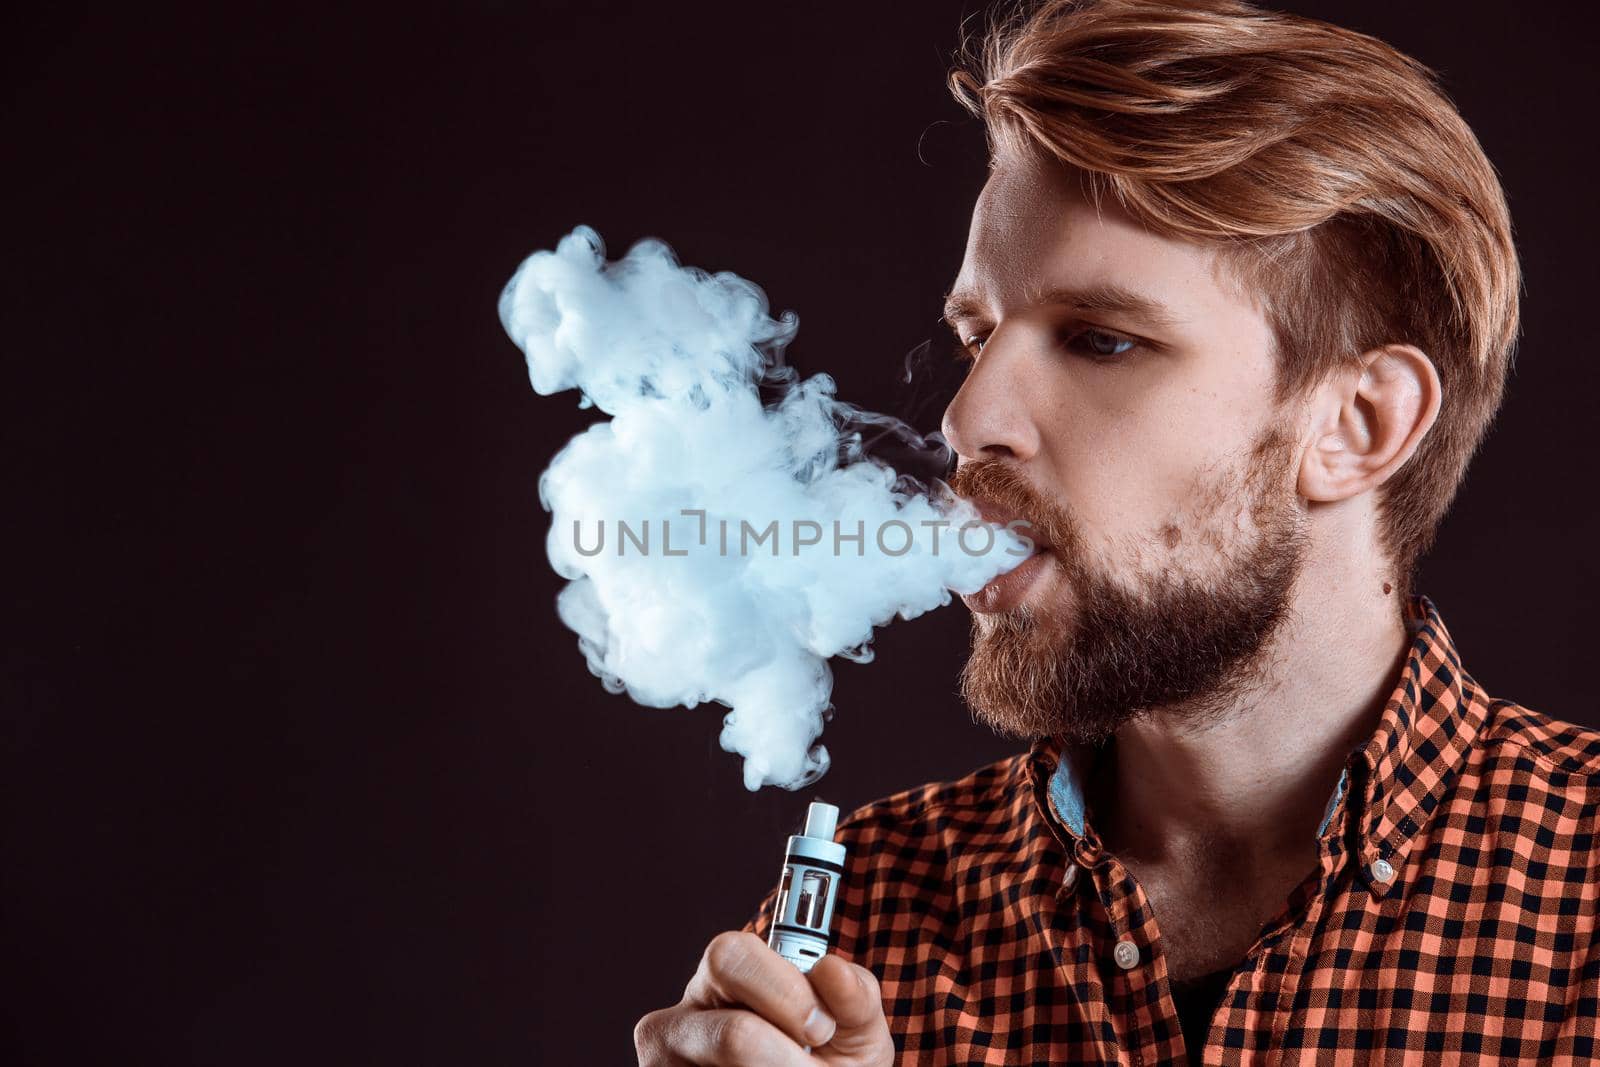 young man wearing a plaid shirt smokes an electronic cigarette on a black background. close-up